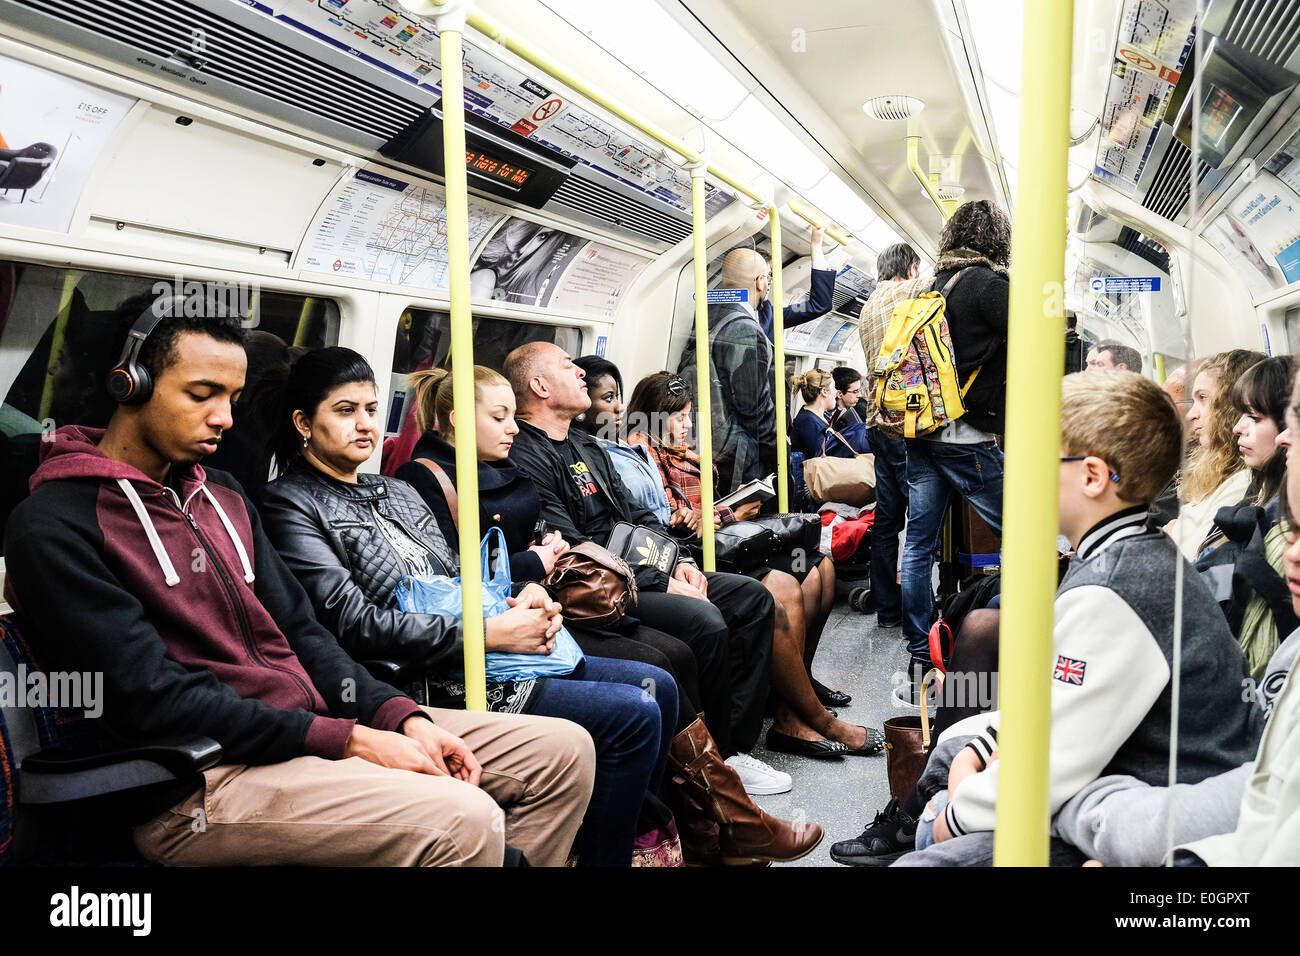 Commuters on a London tube train. Stock Photo